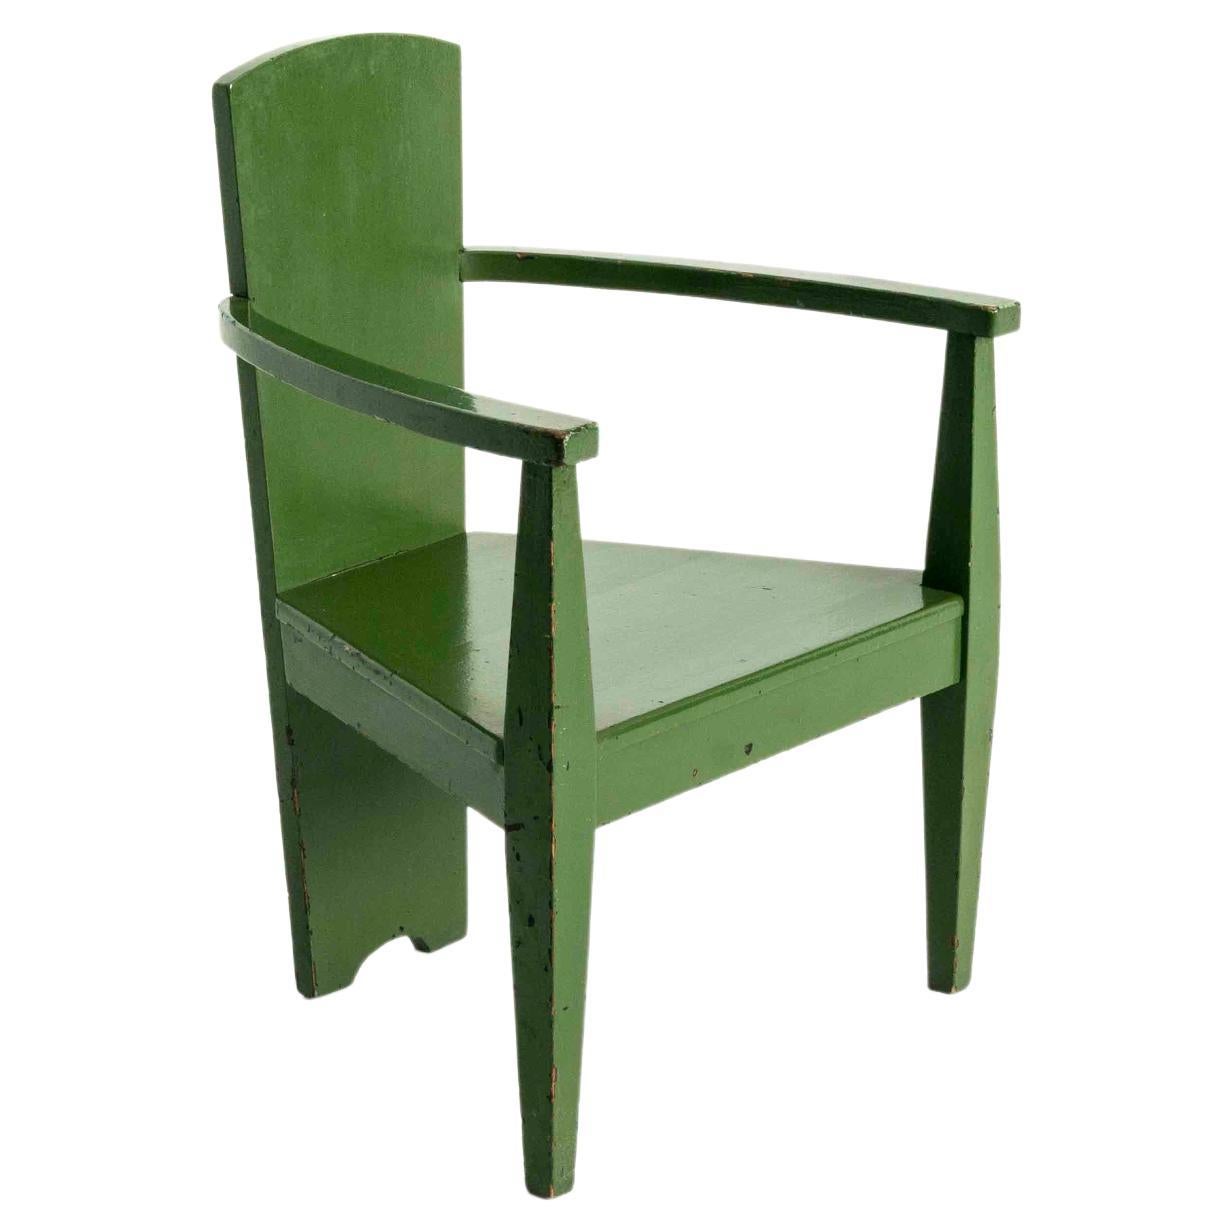 Bauhaus Armchair in Green Paint, Germany 1930s